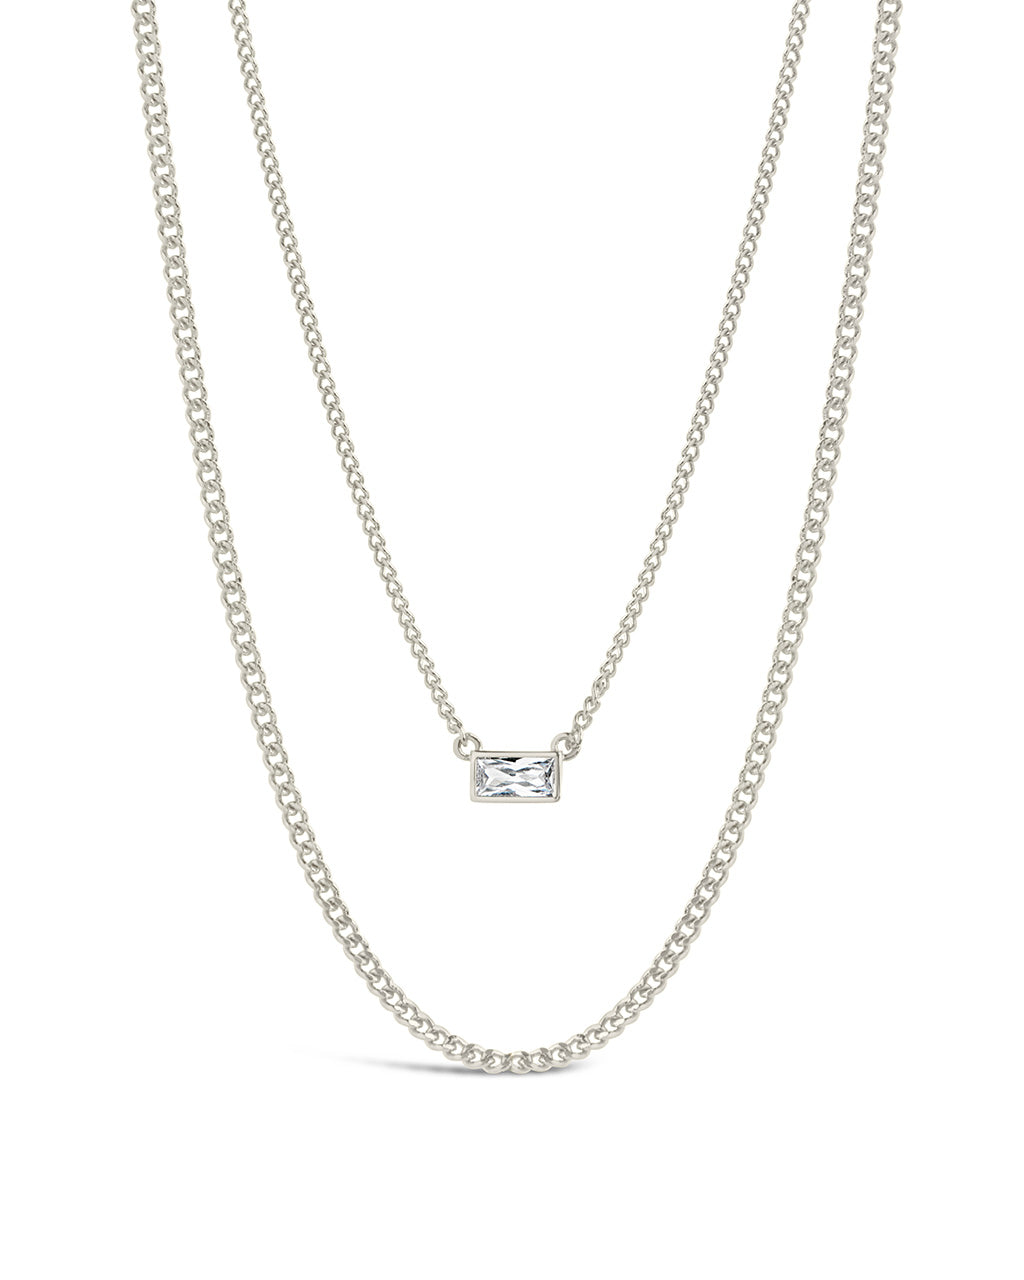 CZ Baguette Layered Curb Chain Necklace Necklace Sterling Forever Silver 